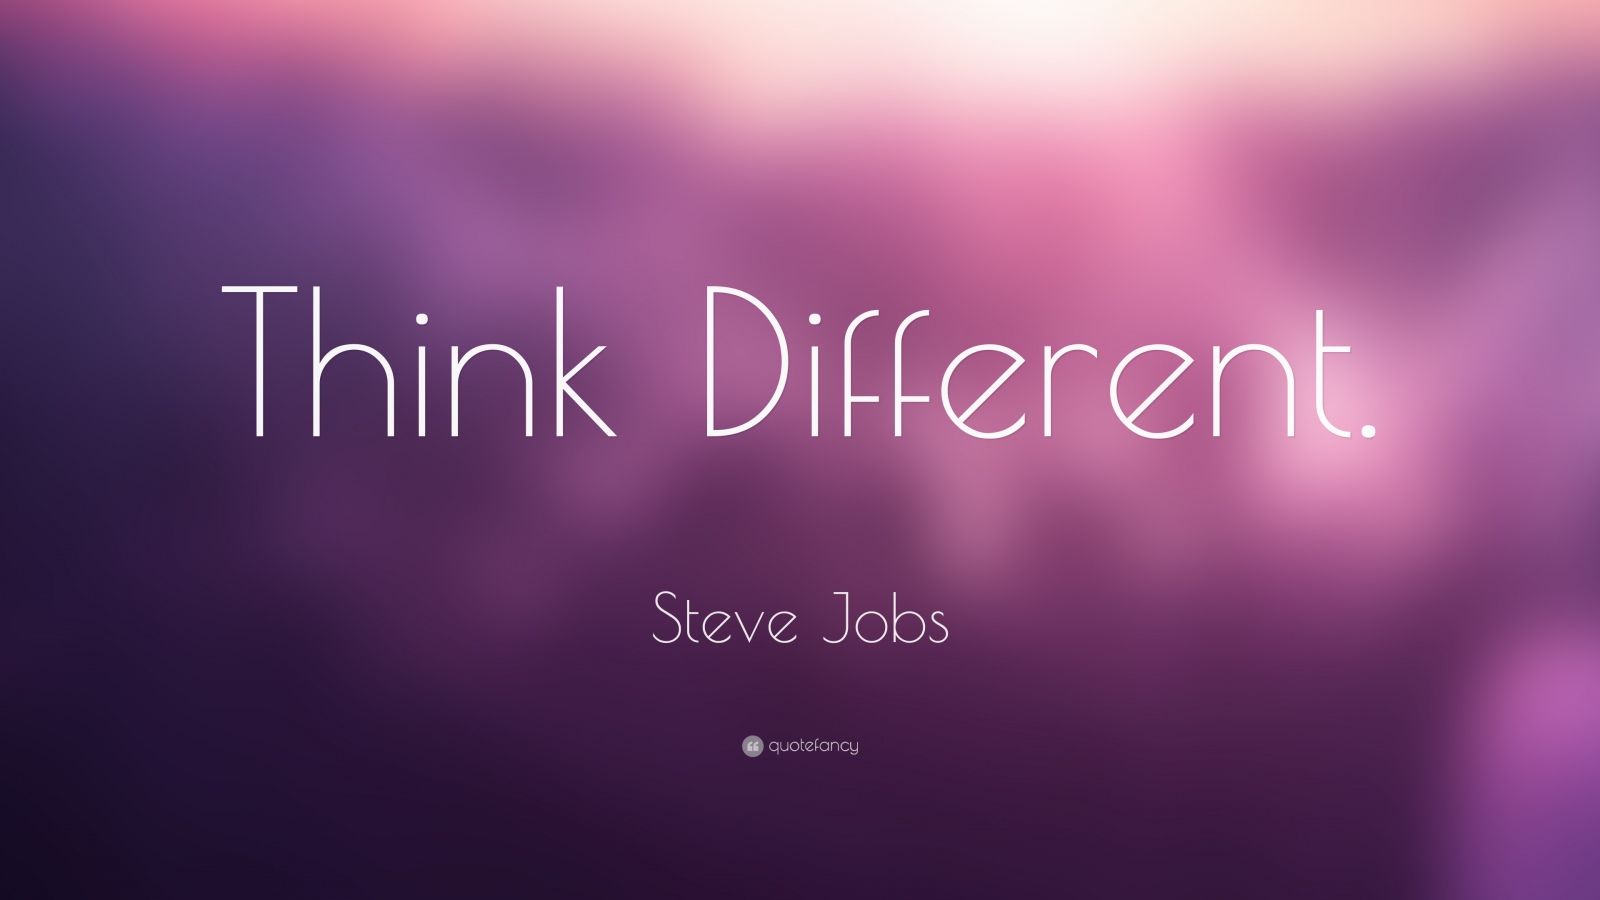 Steve Jobs Quote: “Think Different.” (21 wallpapers) - Quotefancy